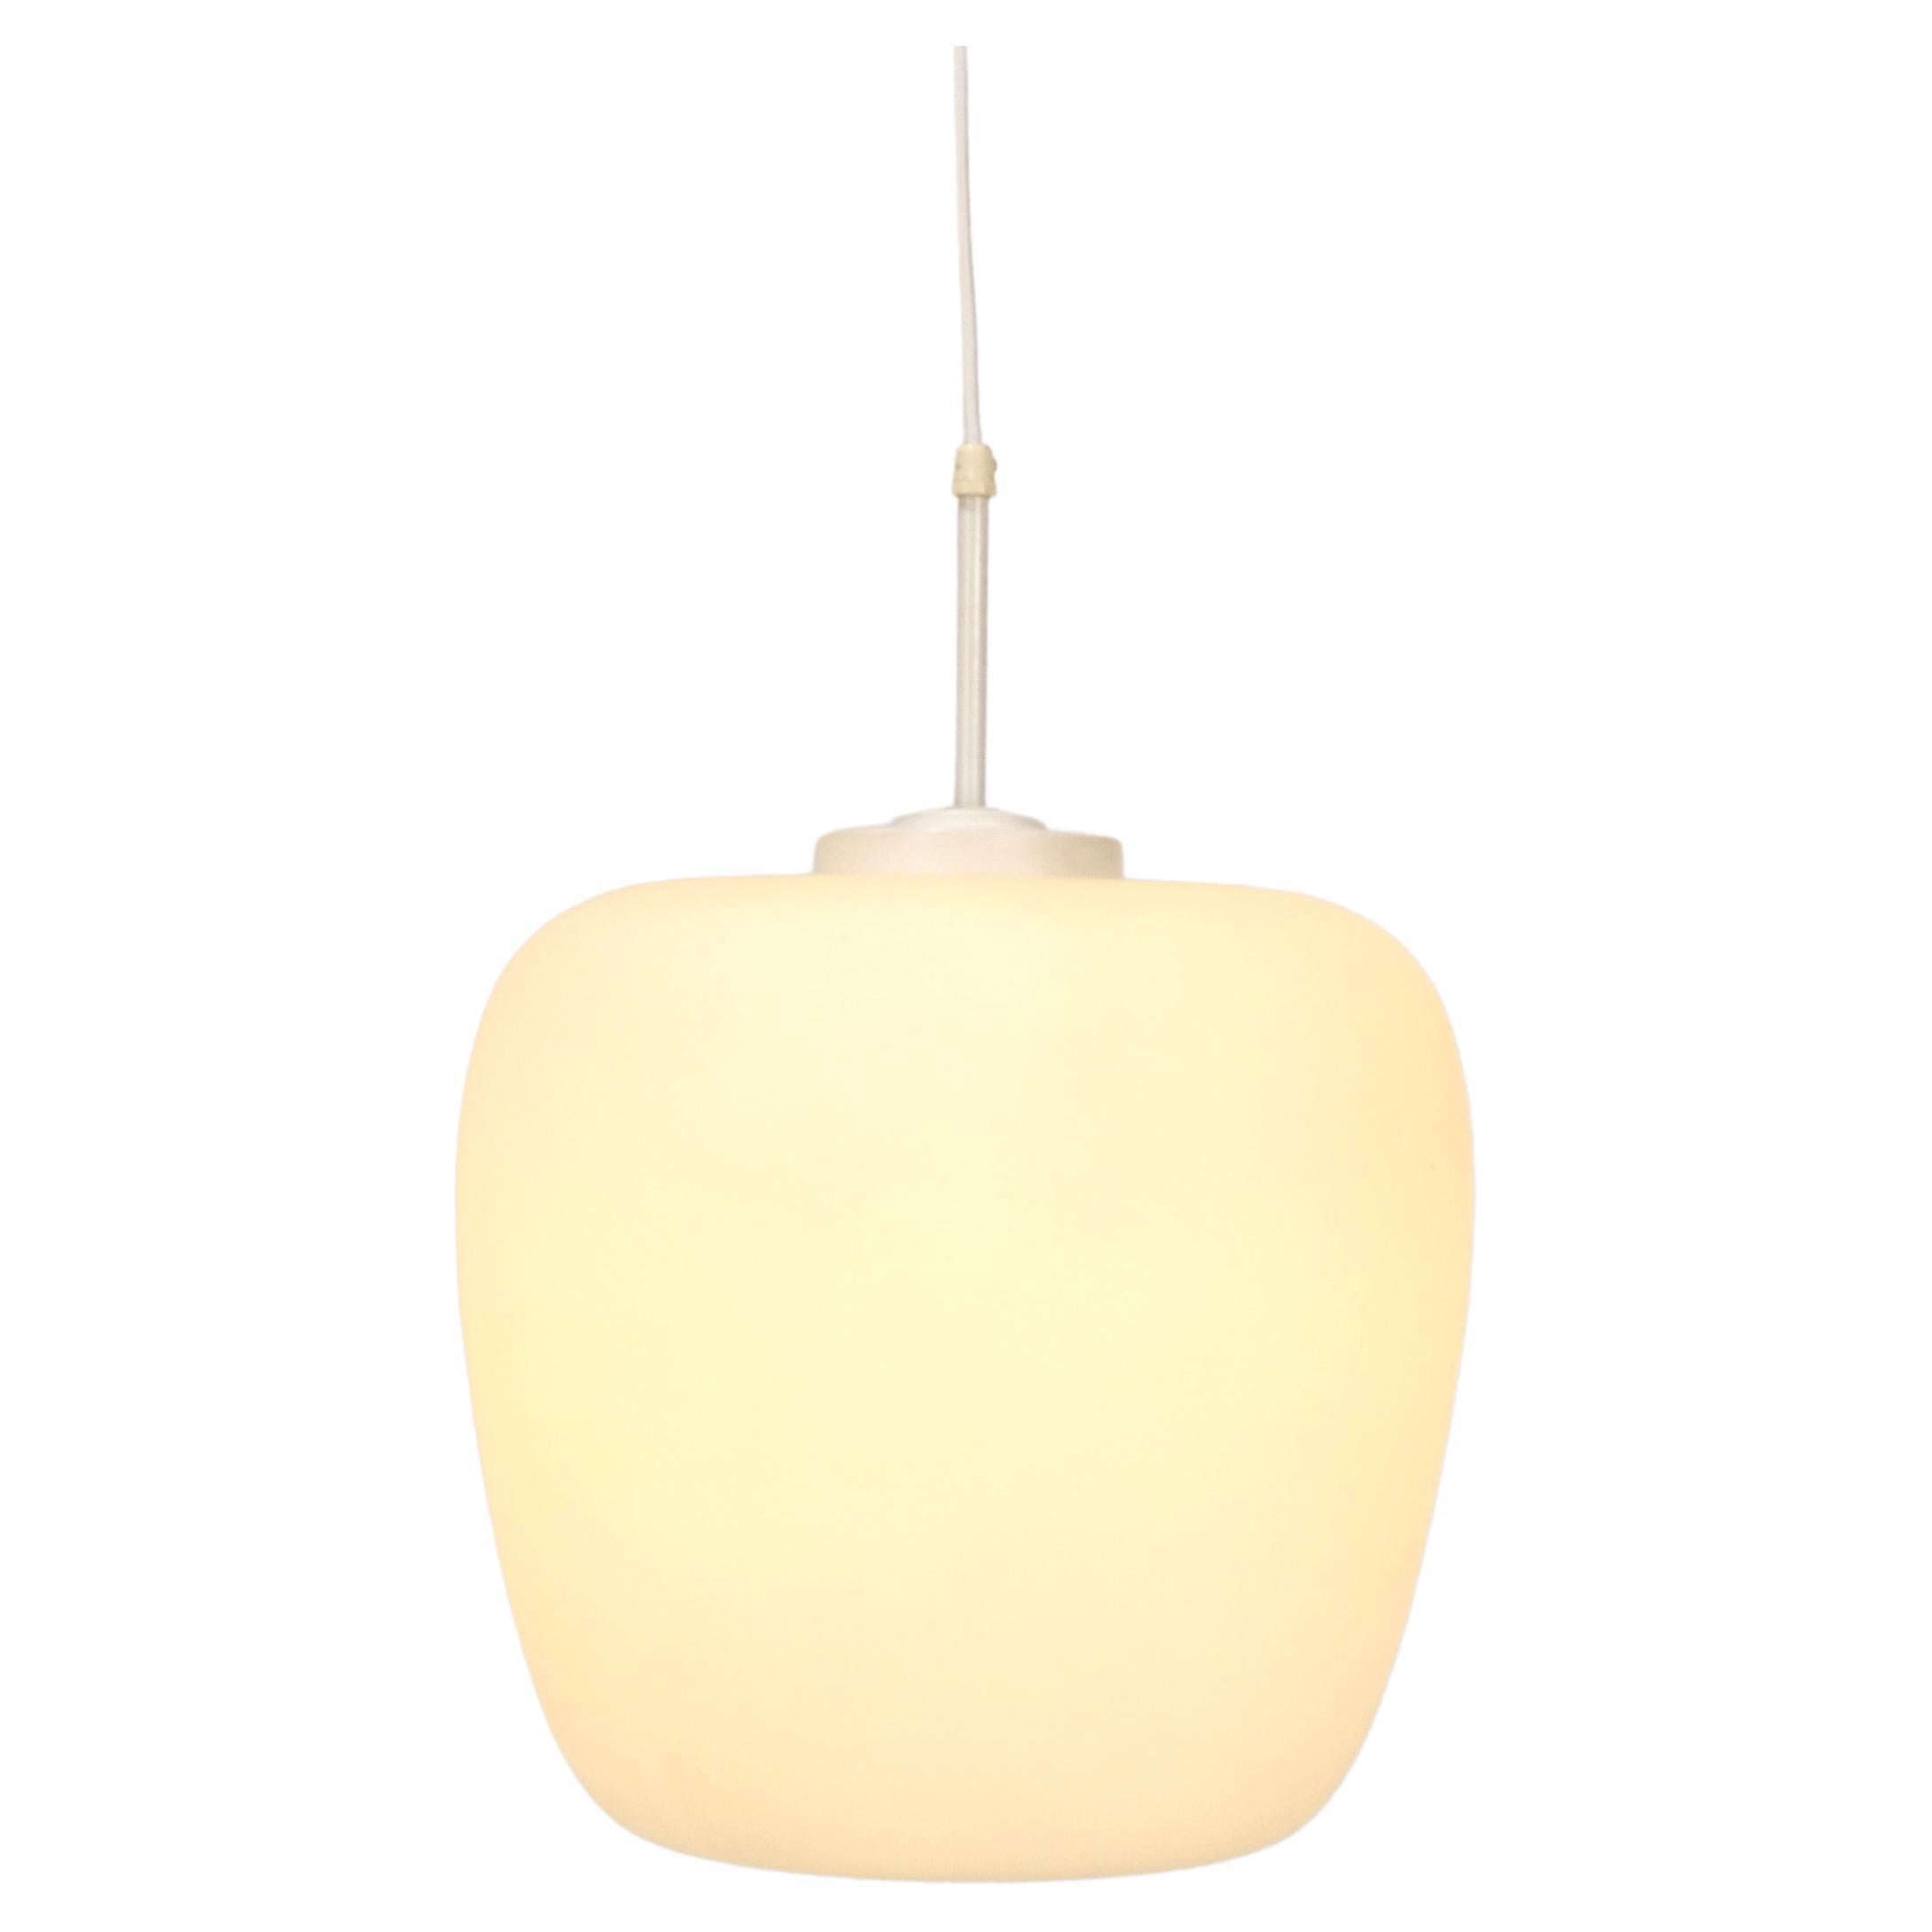 Great pendant lamp in the style of " Kina Lamp" by Bent Karlby